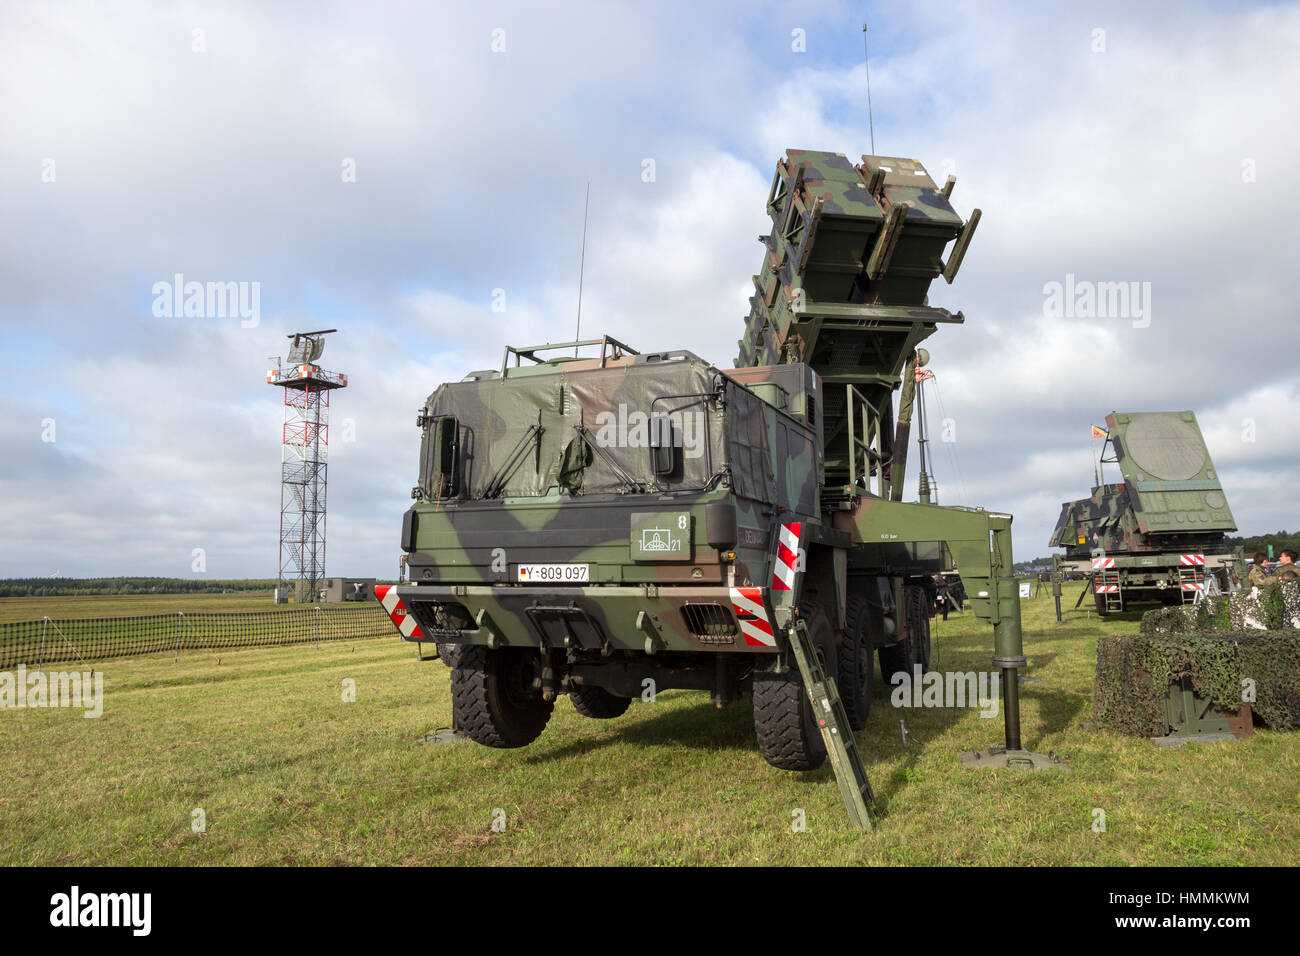 LAAGE, GERMANY - AUG 23, 2014: A German army mobile MIM-104 Patriot surface-to-air missile (SAM) system on display during the Laage airbase open house Stock Photo